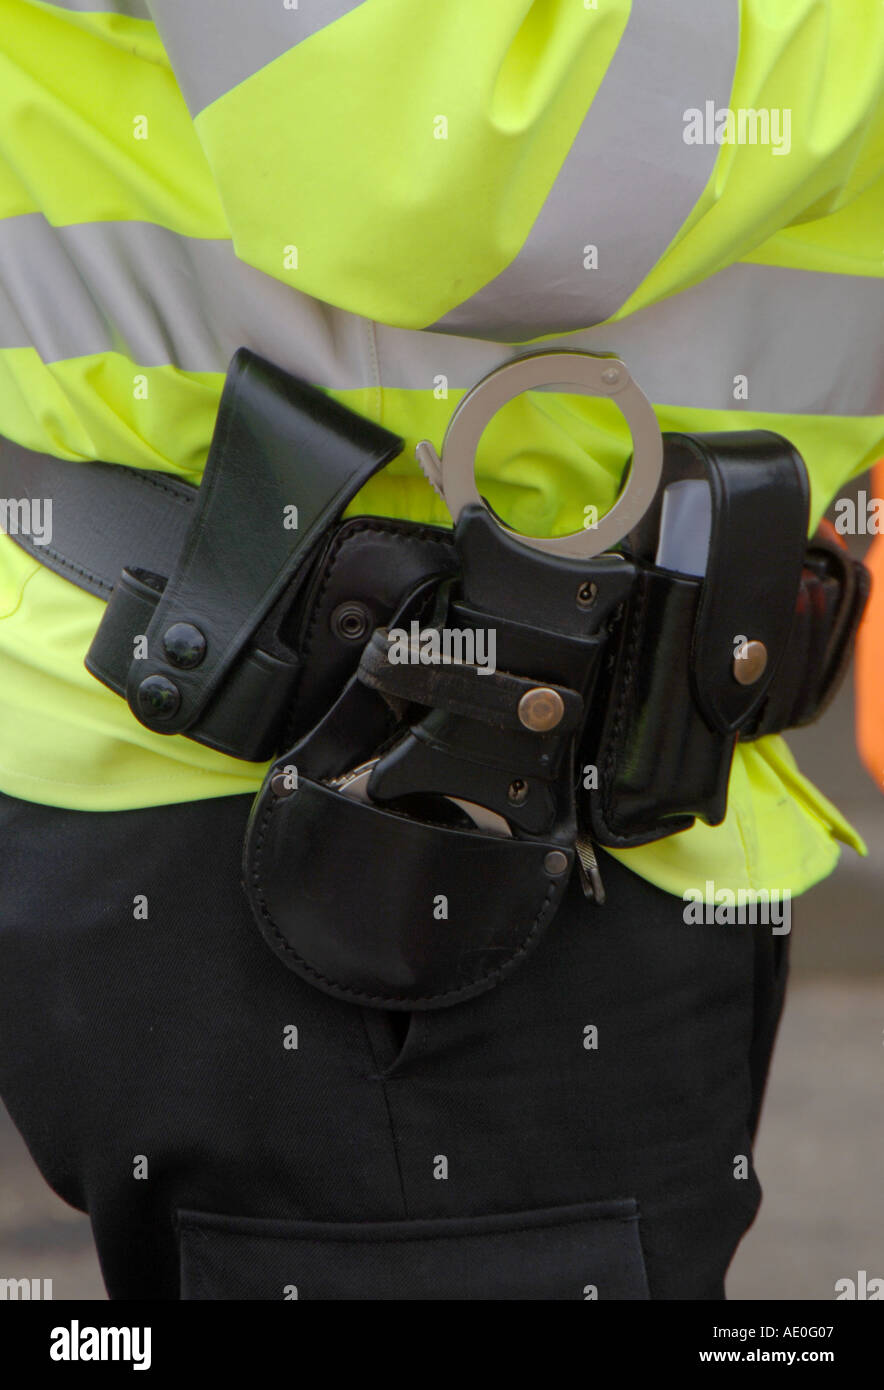 Police handcuffs and utility belt Stock Photo